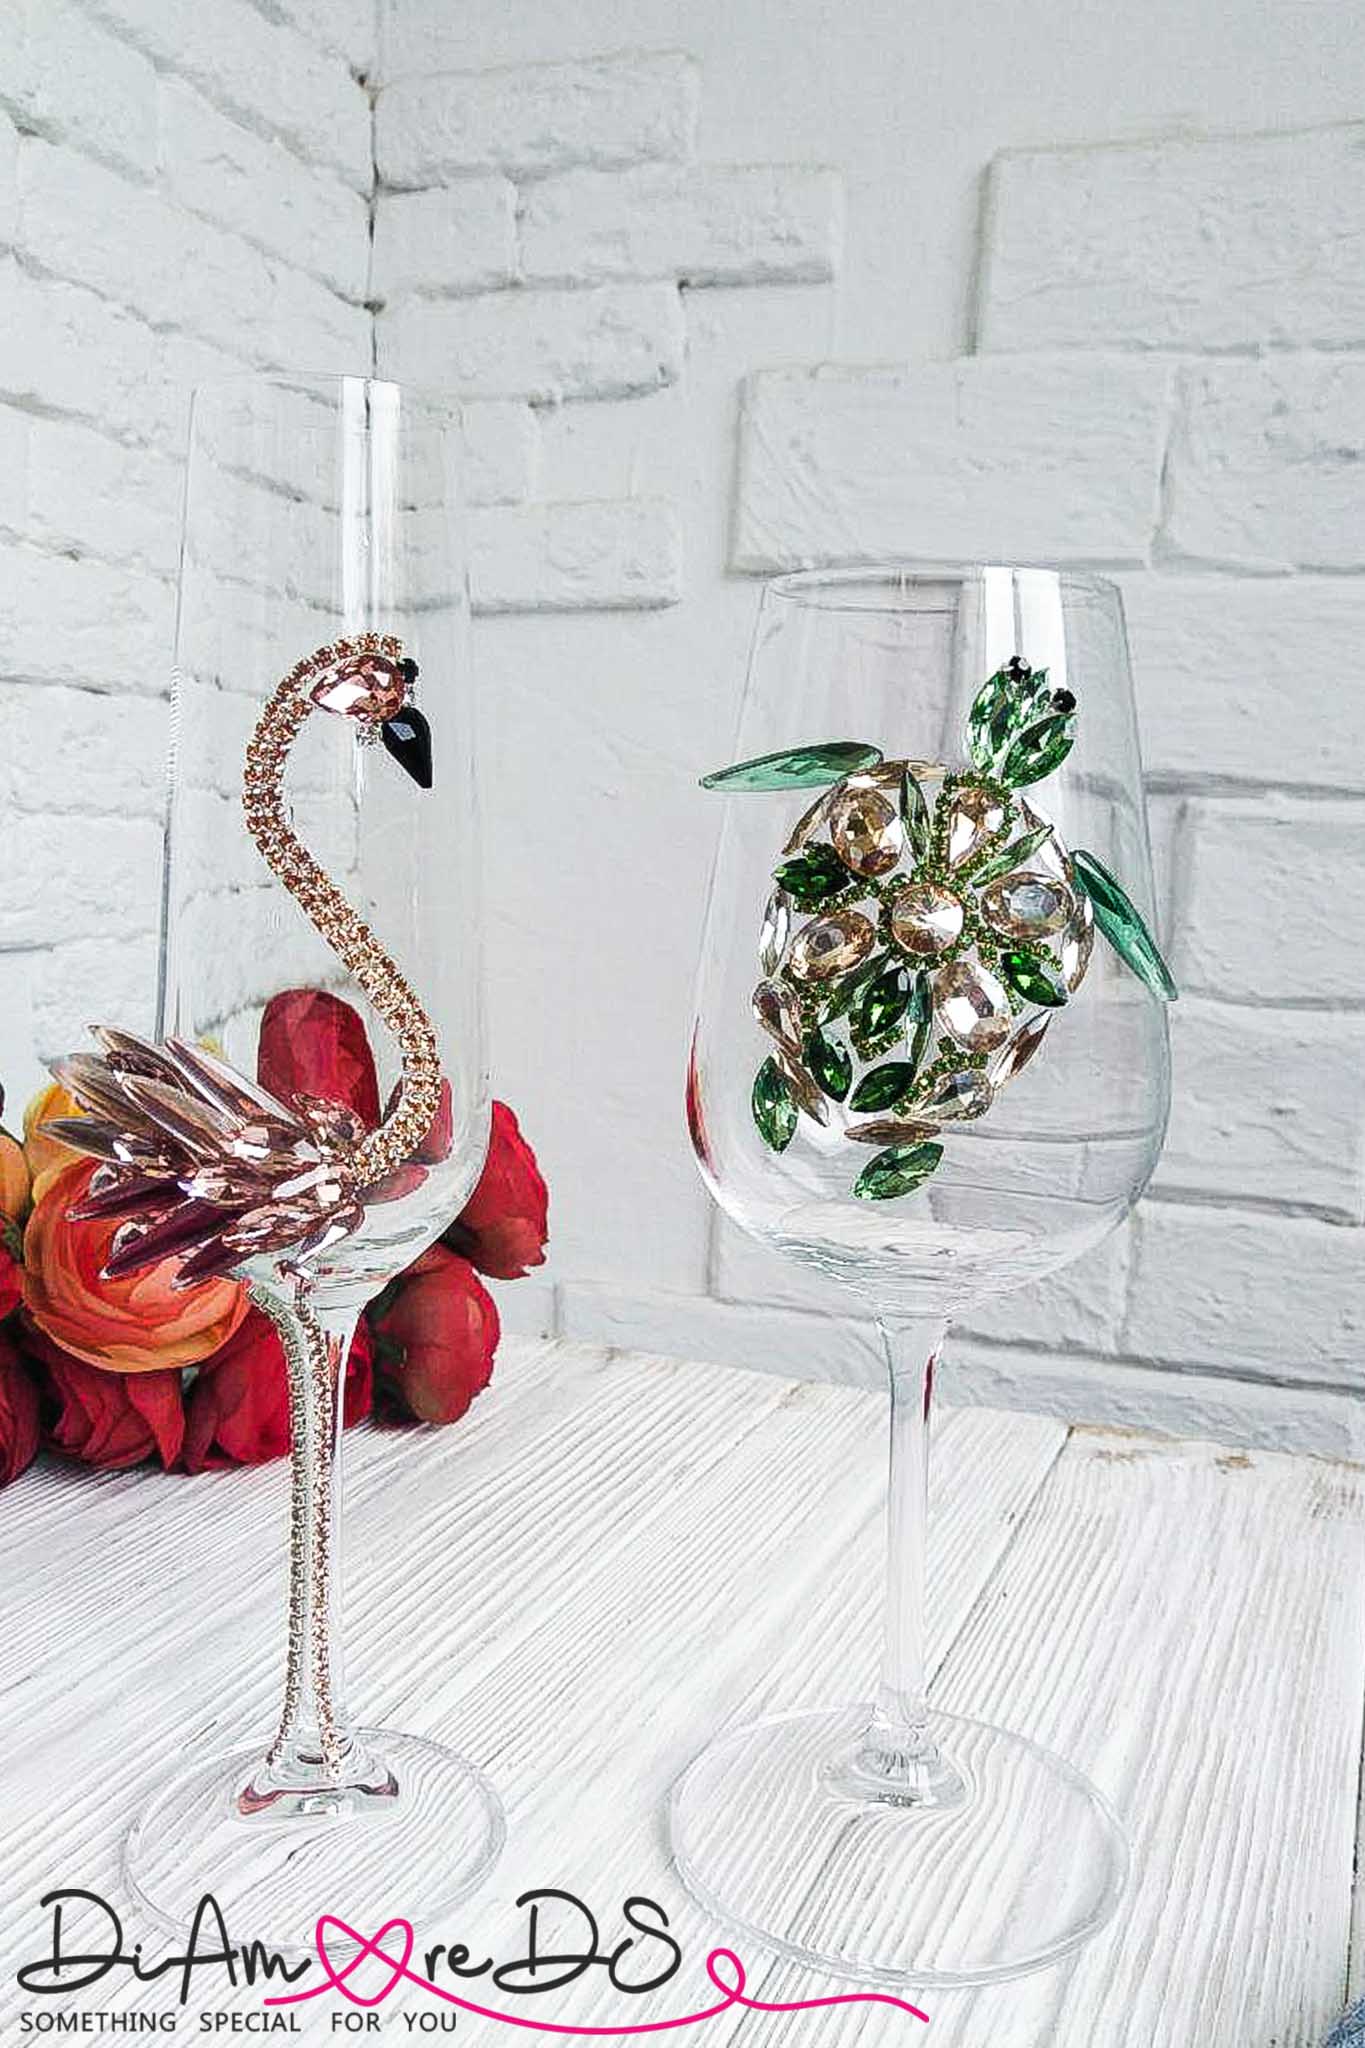 Tropical elegance captured in a wine glass, adorned with a handcrafted sea turtle made from sparkling green crystals.